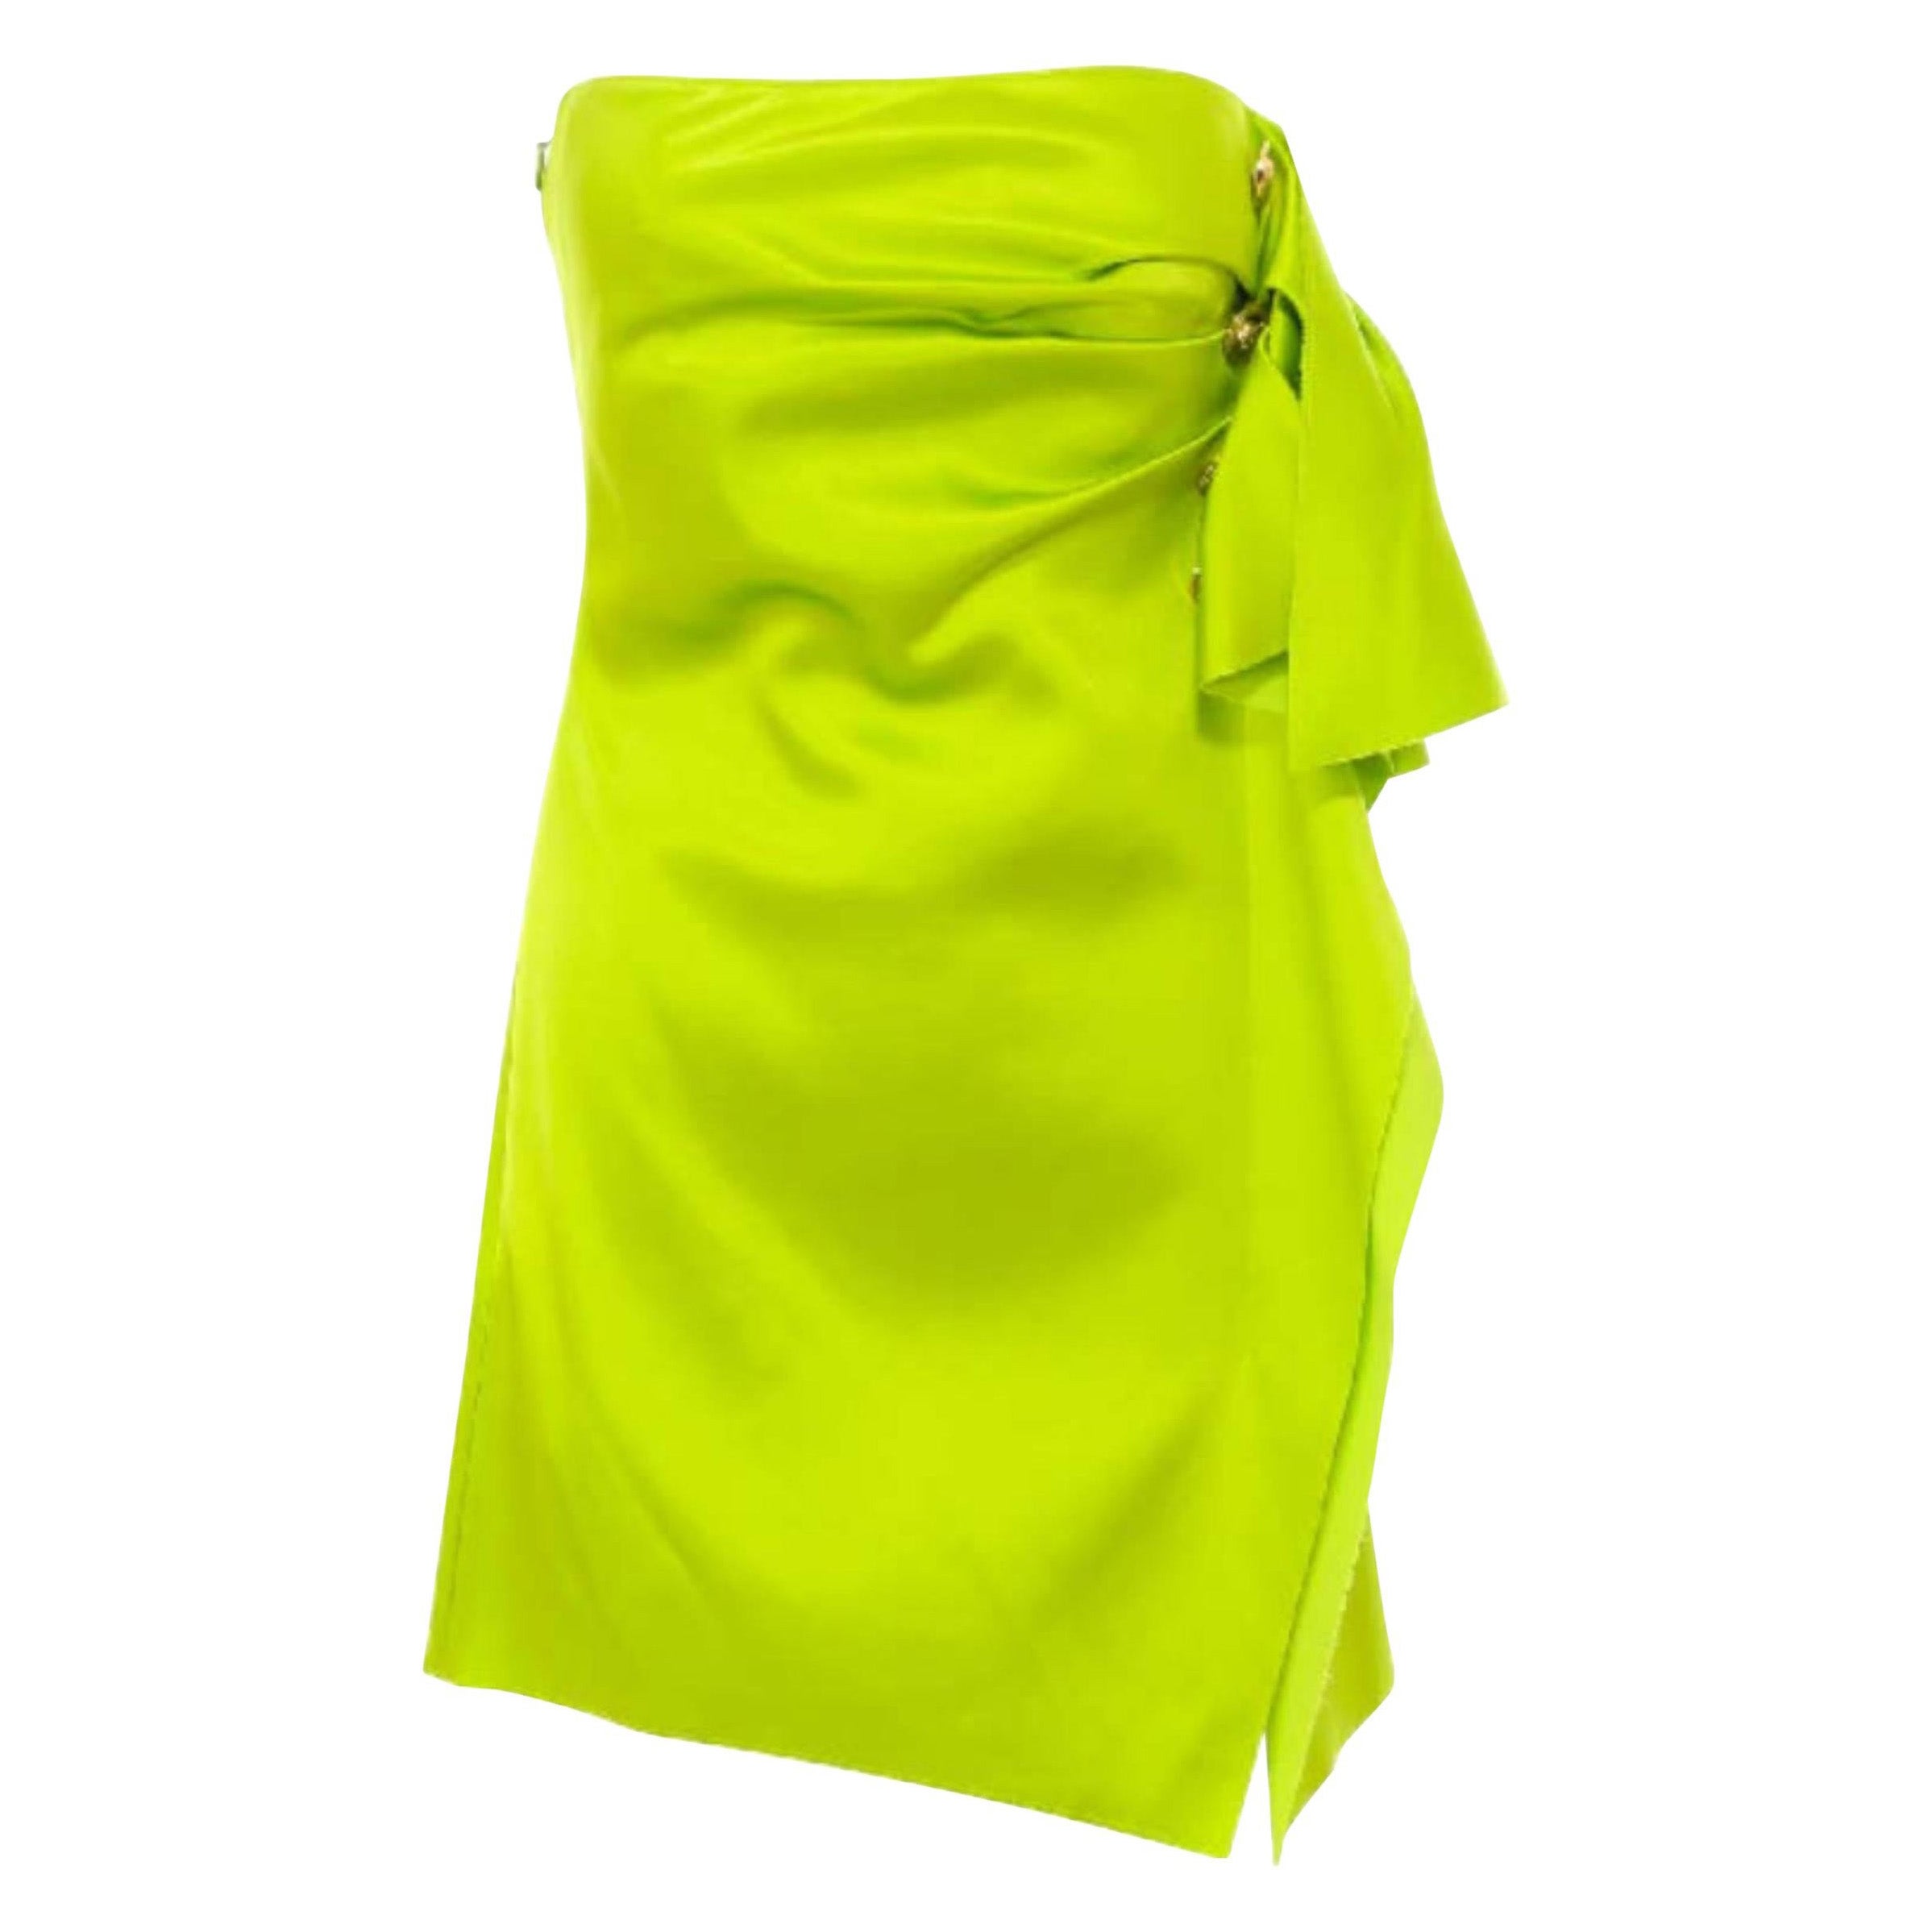 Spring 2020 Look #42 LIME SATIN STRAPLESS DRESS as seen as Selena 40 - 4 For Sale